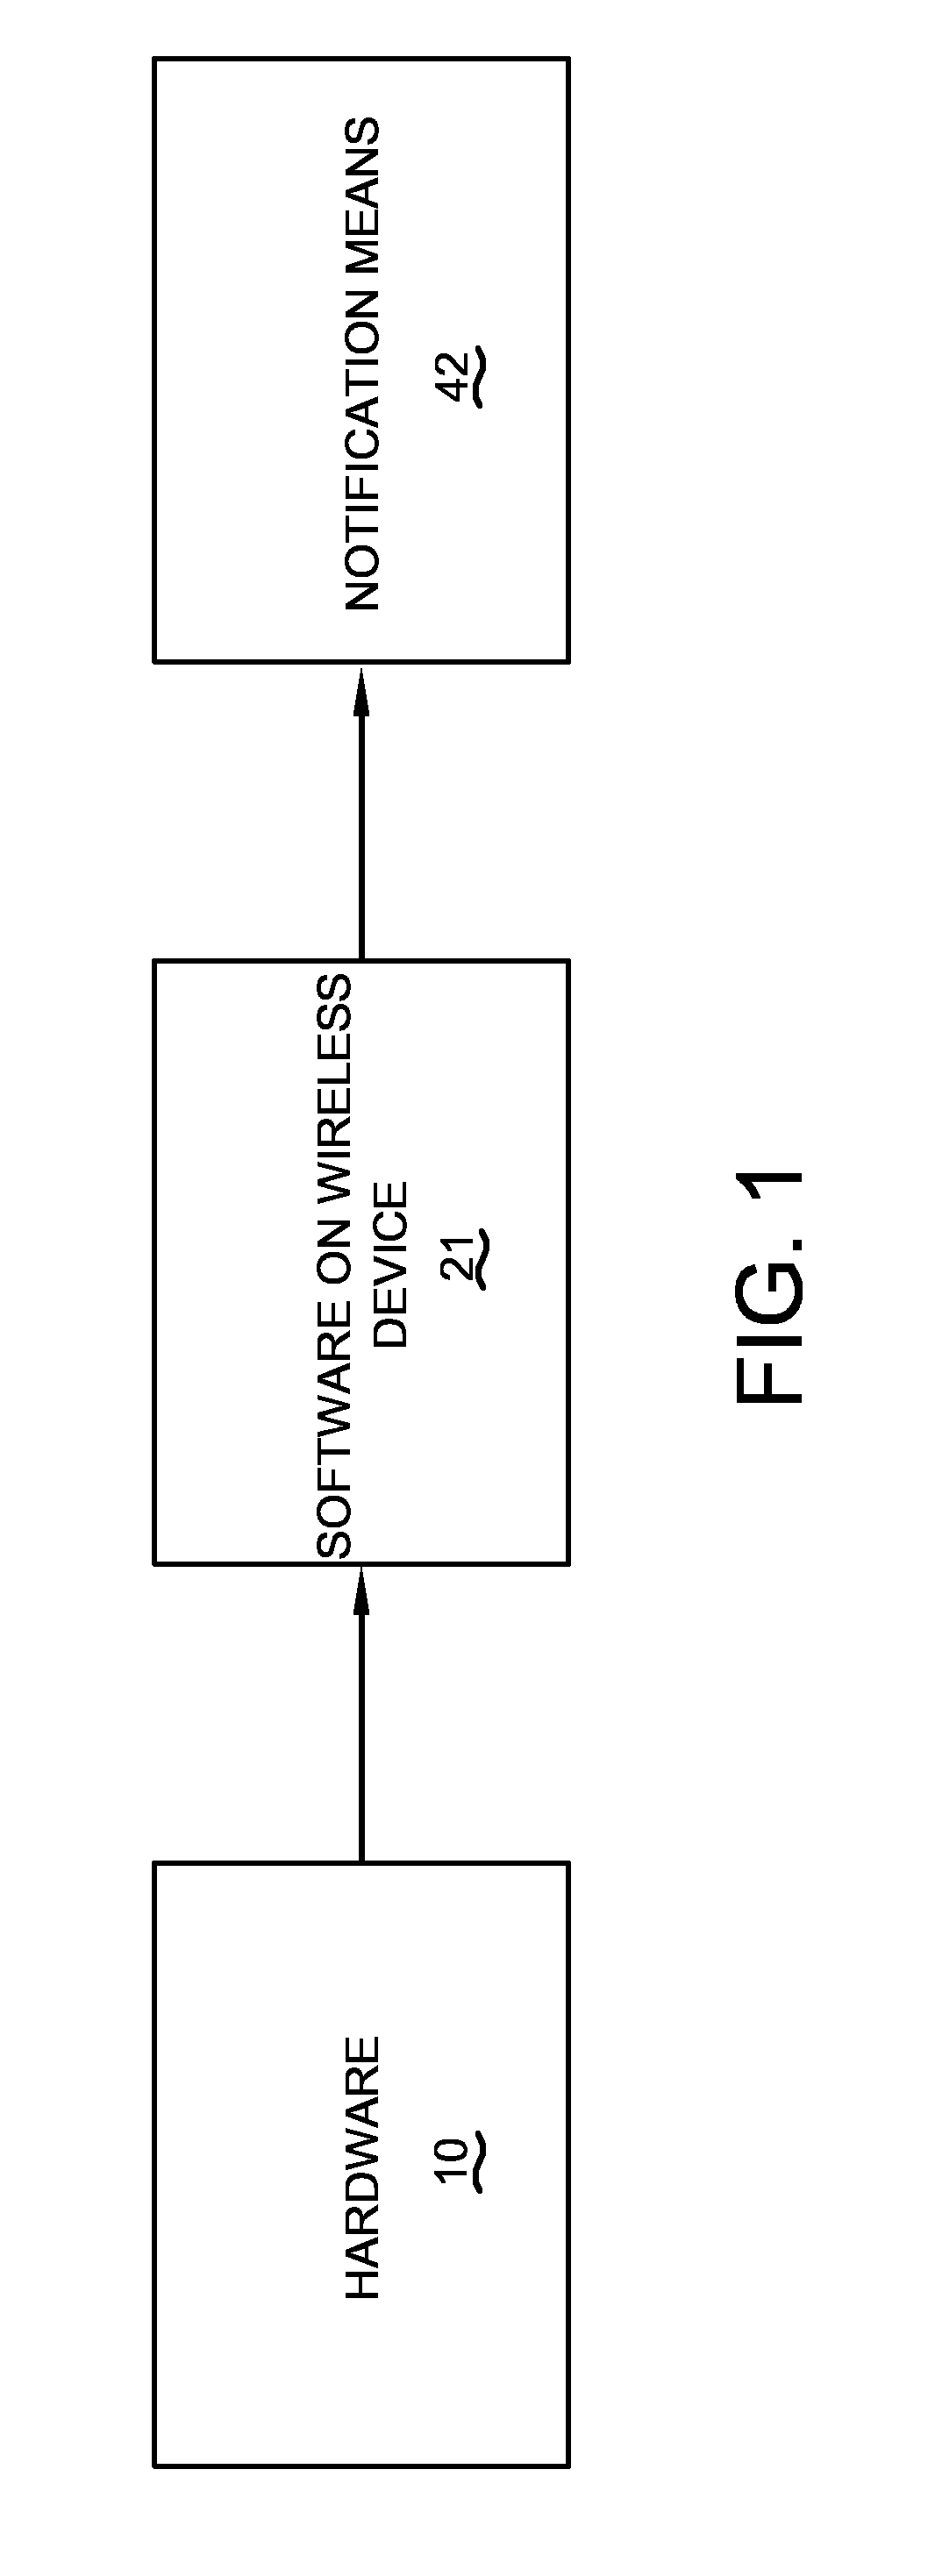 Method and apparatus for disabling certain communication features of a vehicle drivers wireless phone